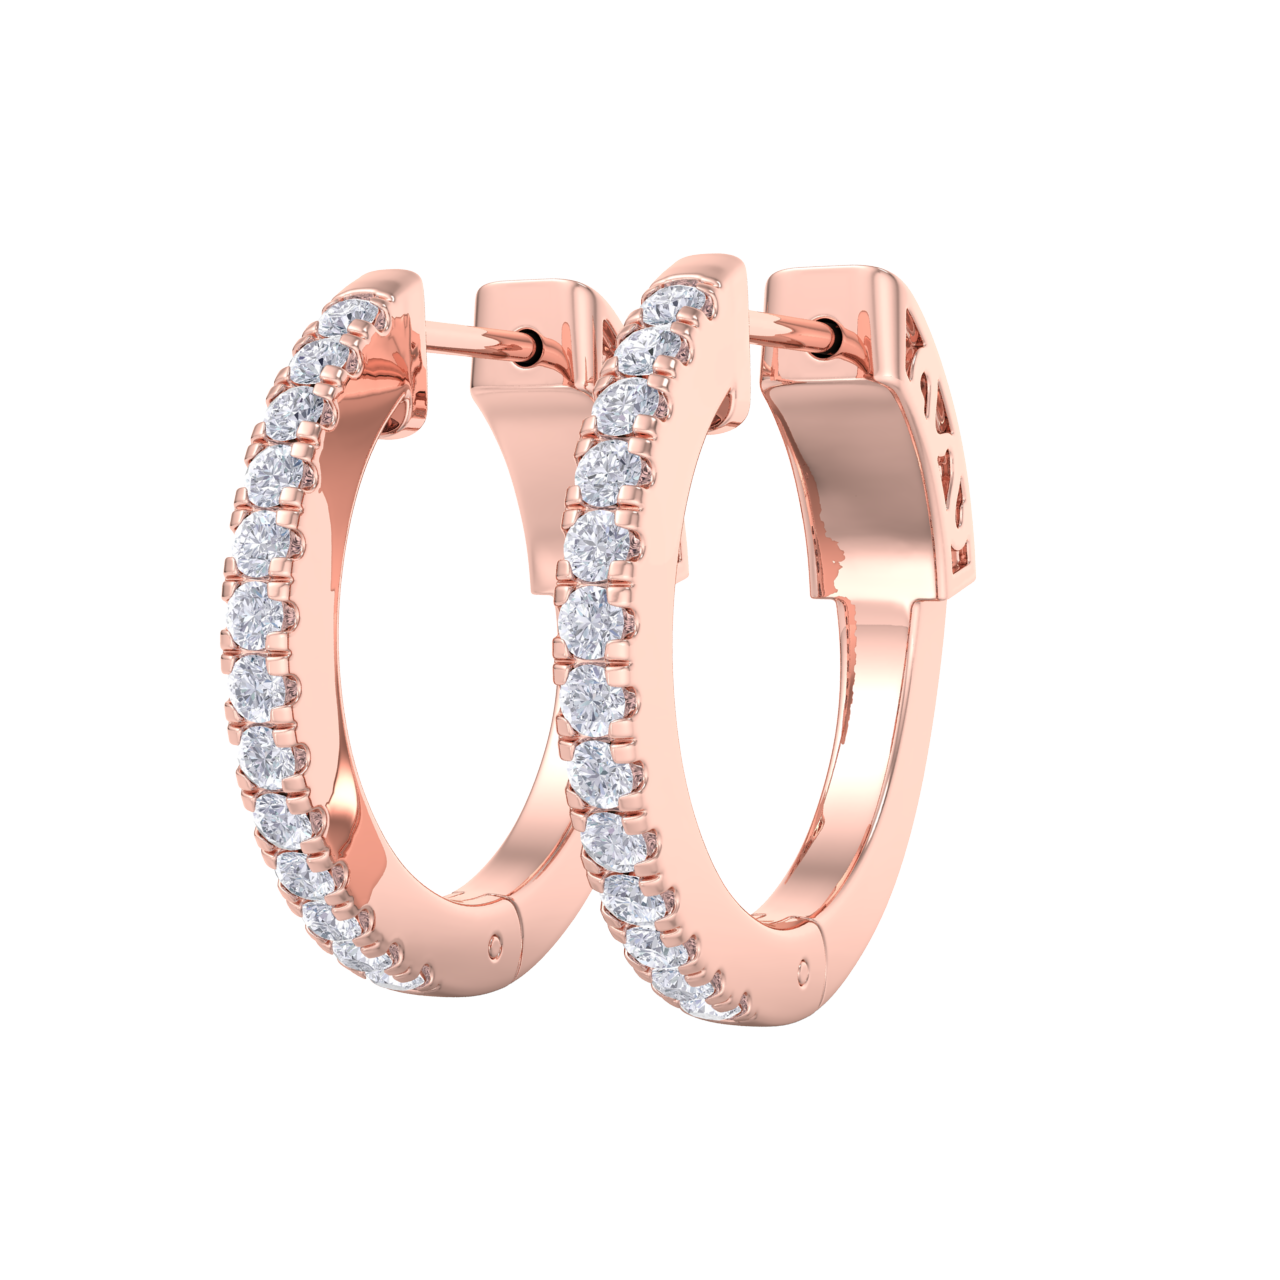 Petite diamond hoop earrings in rose gold with white diamonds of 0.34 ct in weight